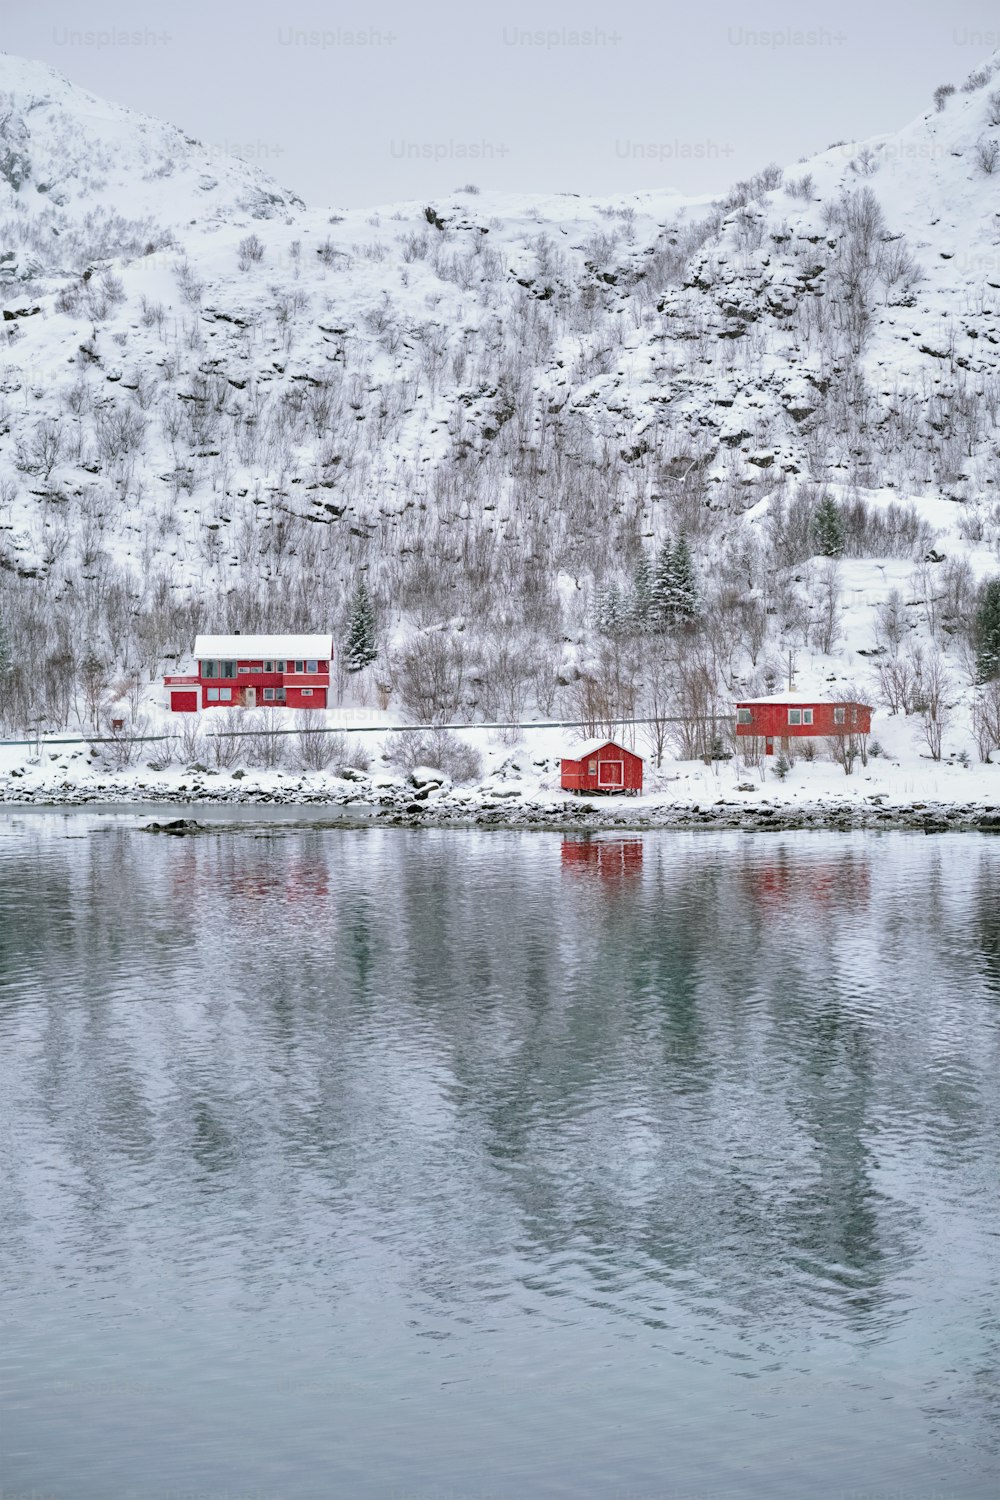 Traditional red rorbu houses on fjord shore in snow in winter. Lofoten islands, Norway